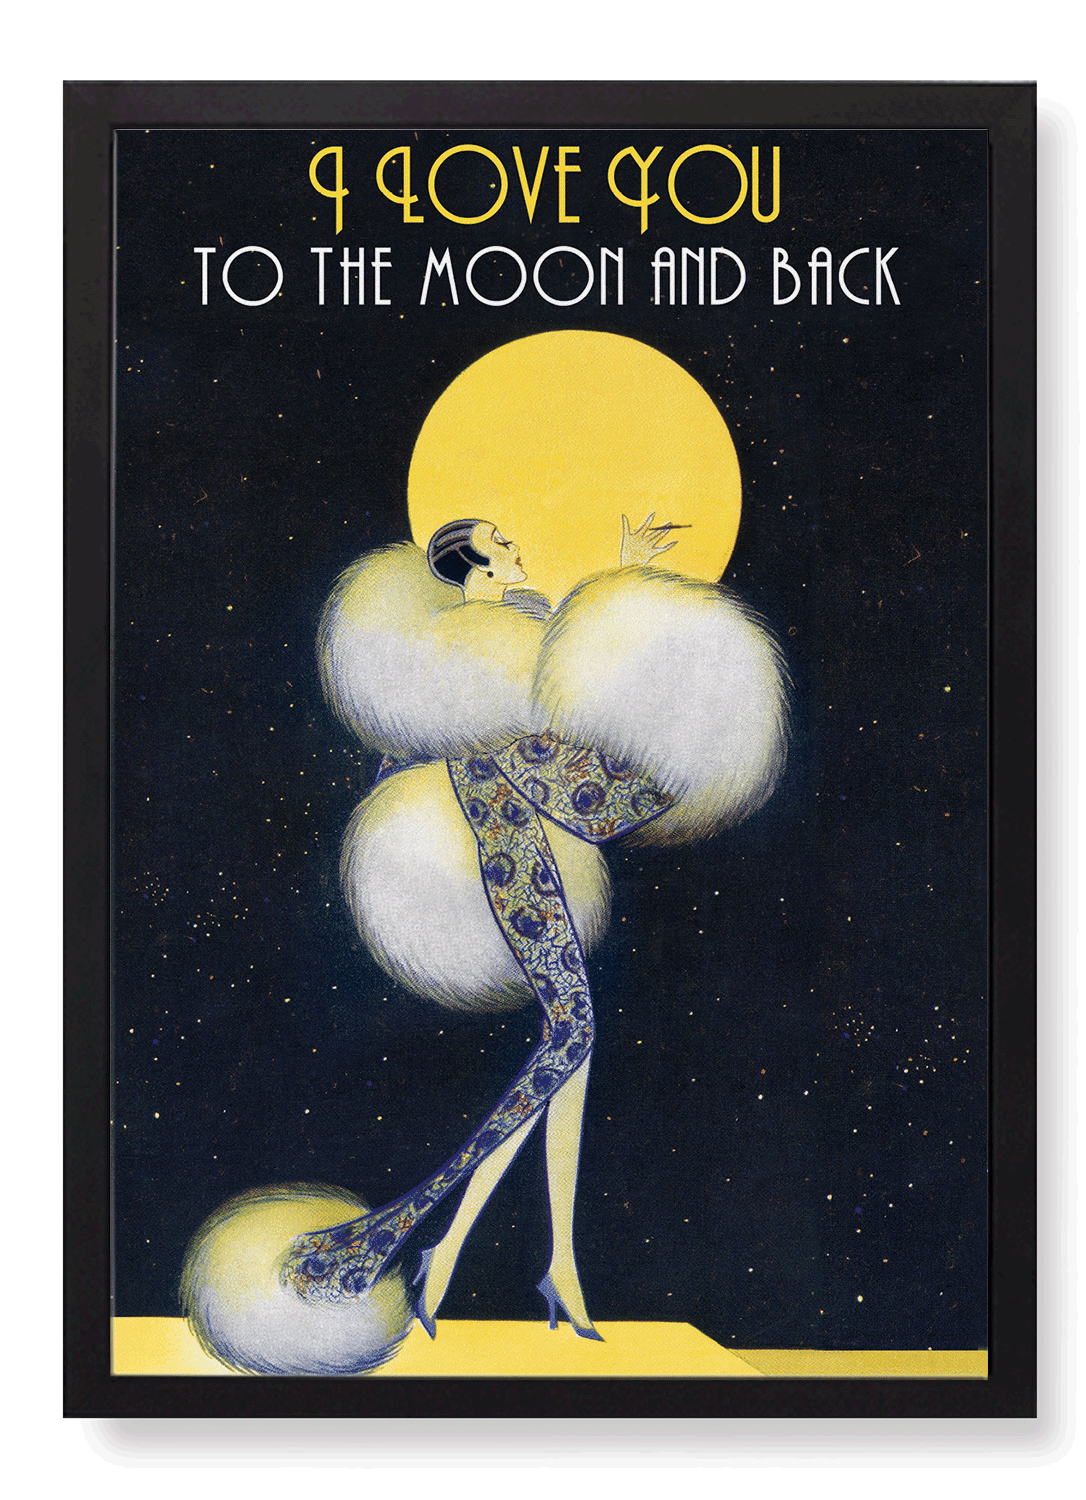 MOON AND BACK